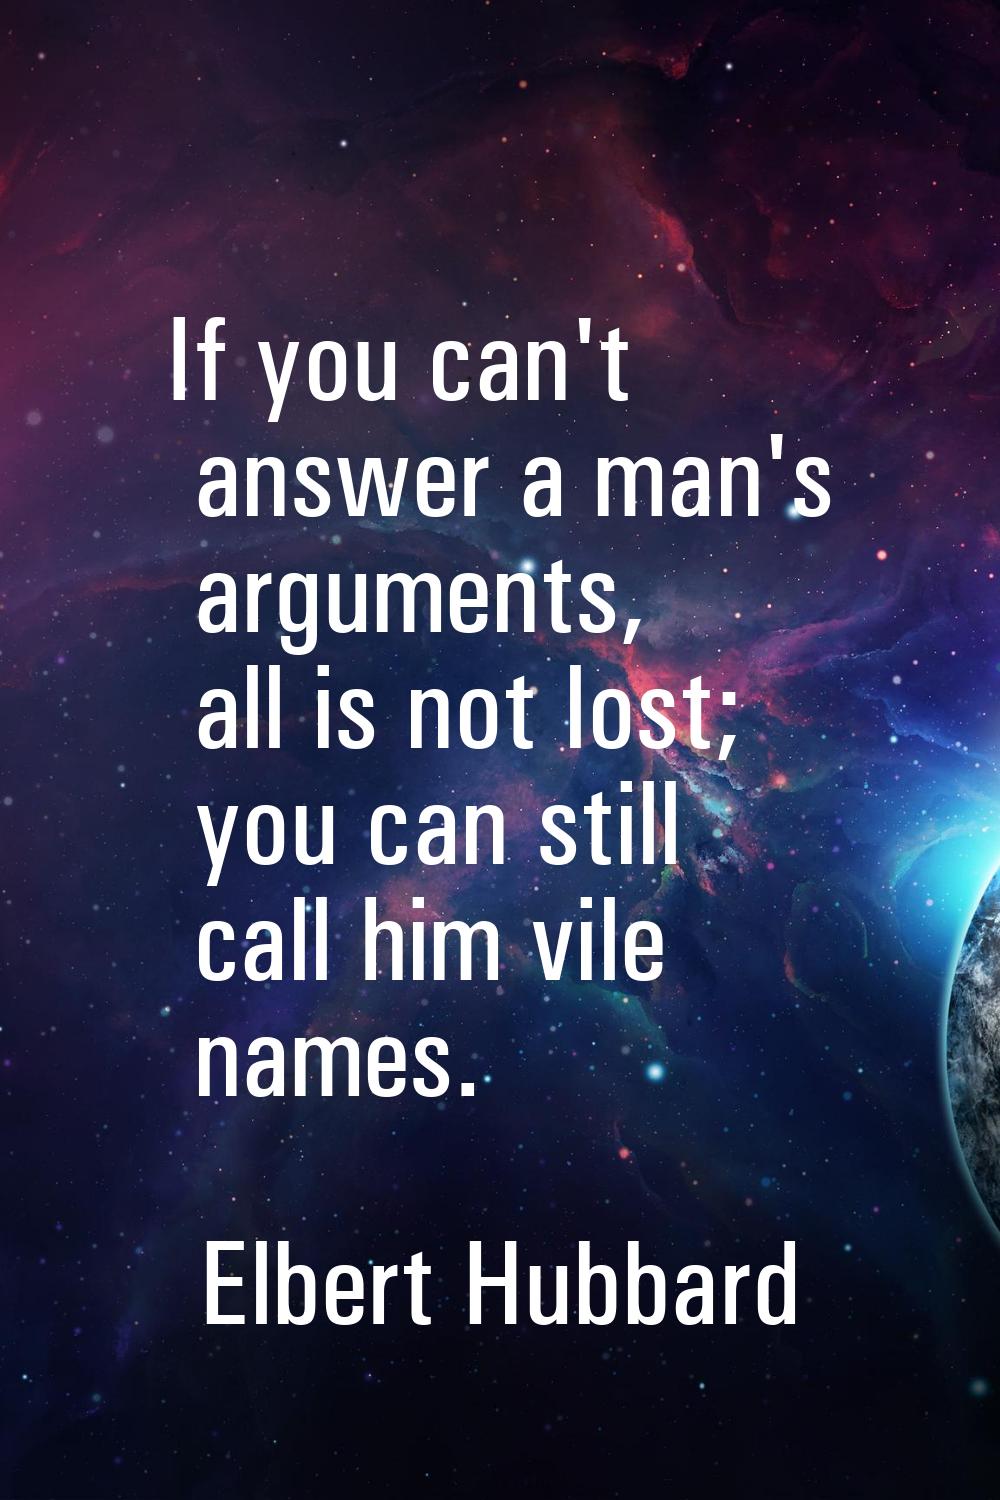 If you can't answer a man's arguments, all is not lost; you can still call him vile names.